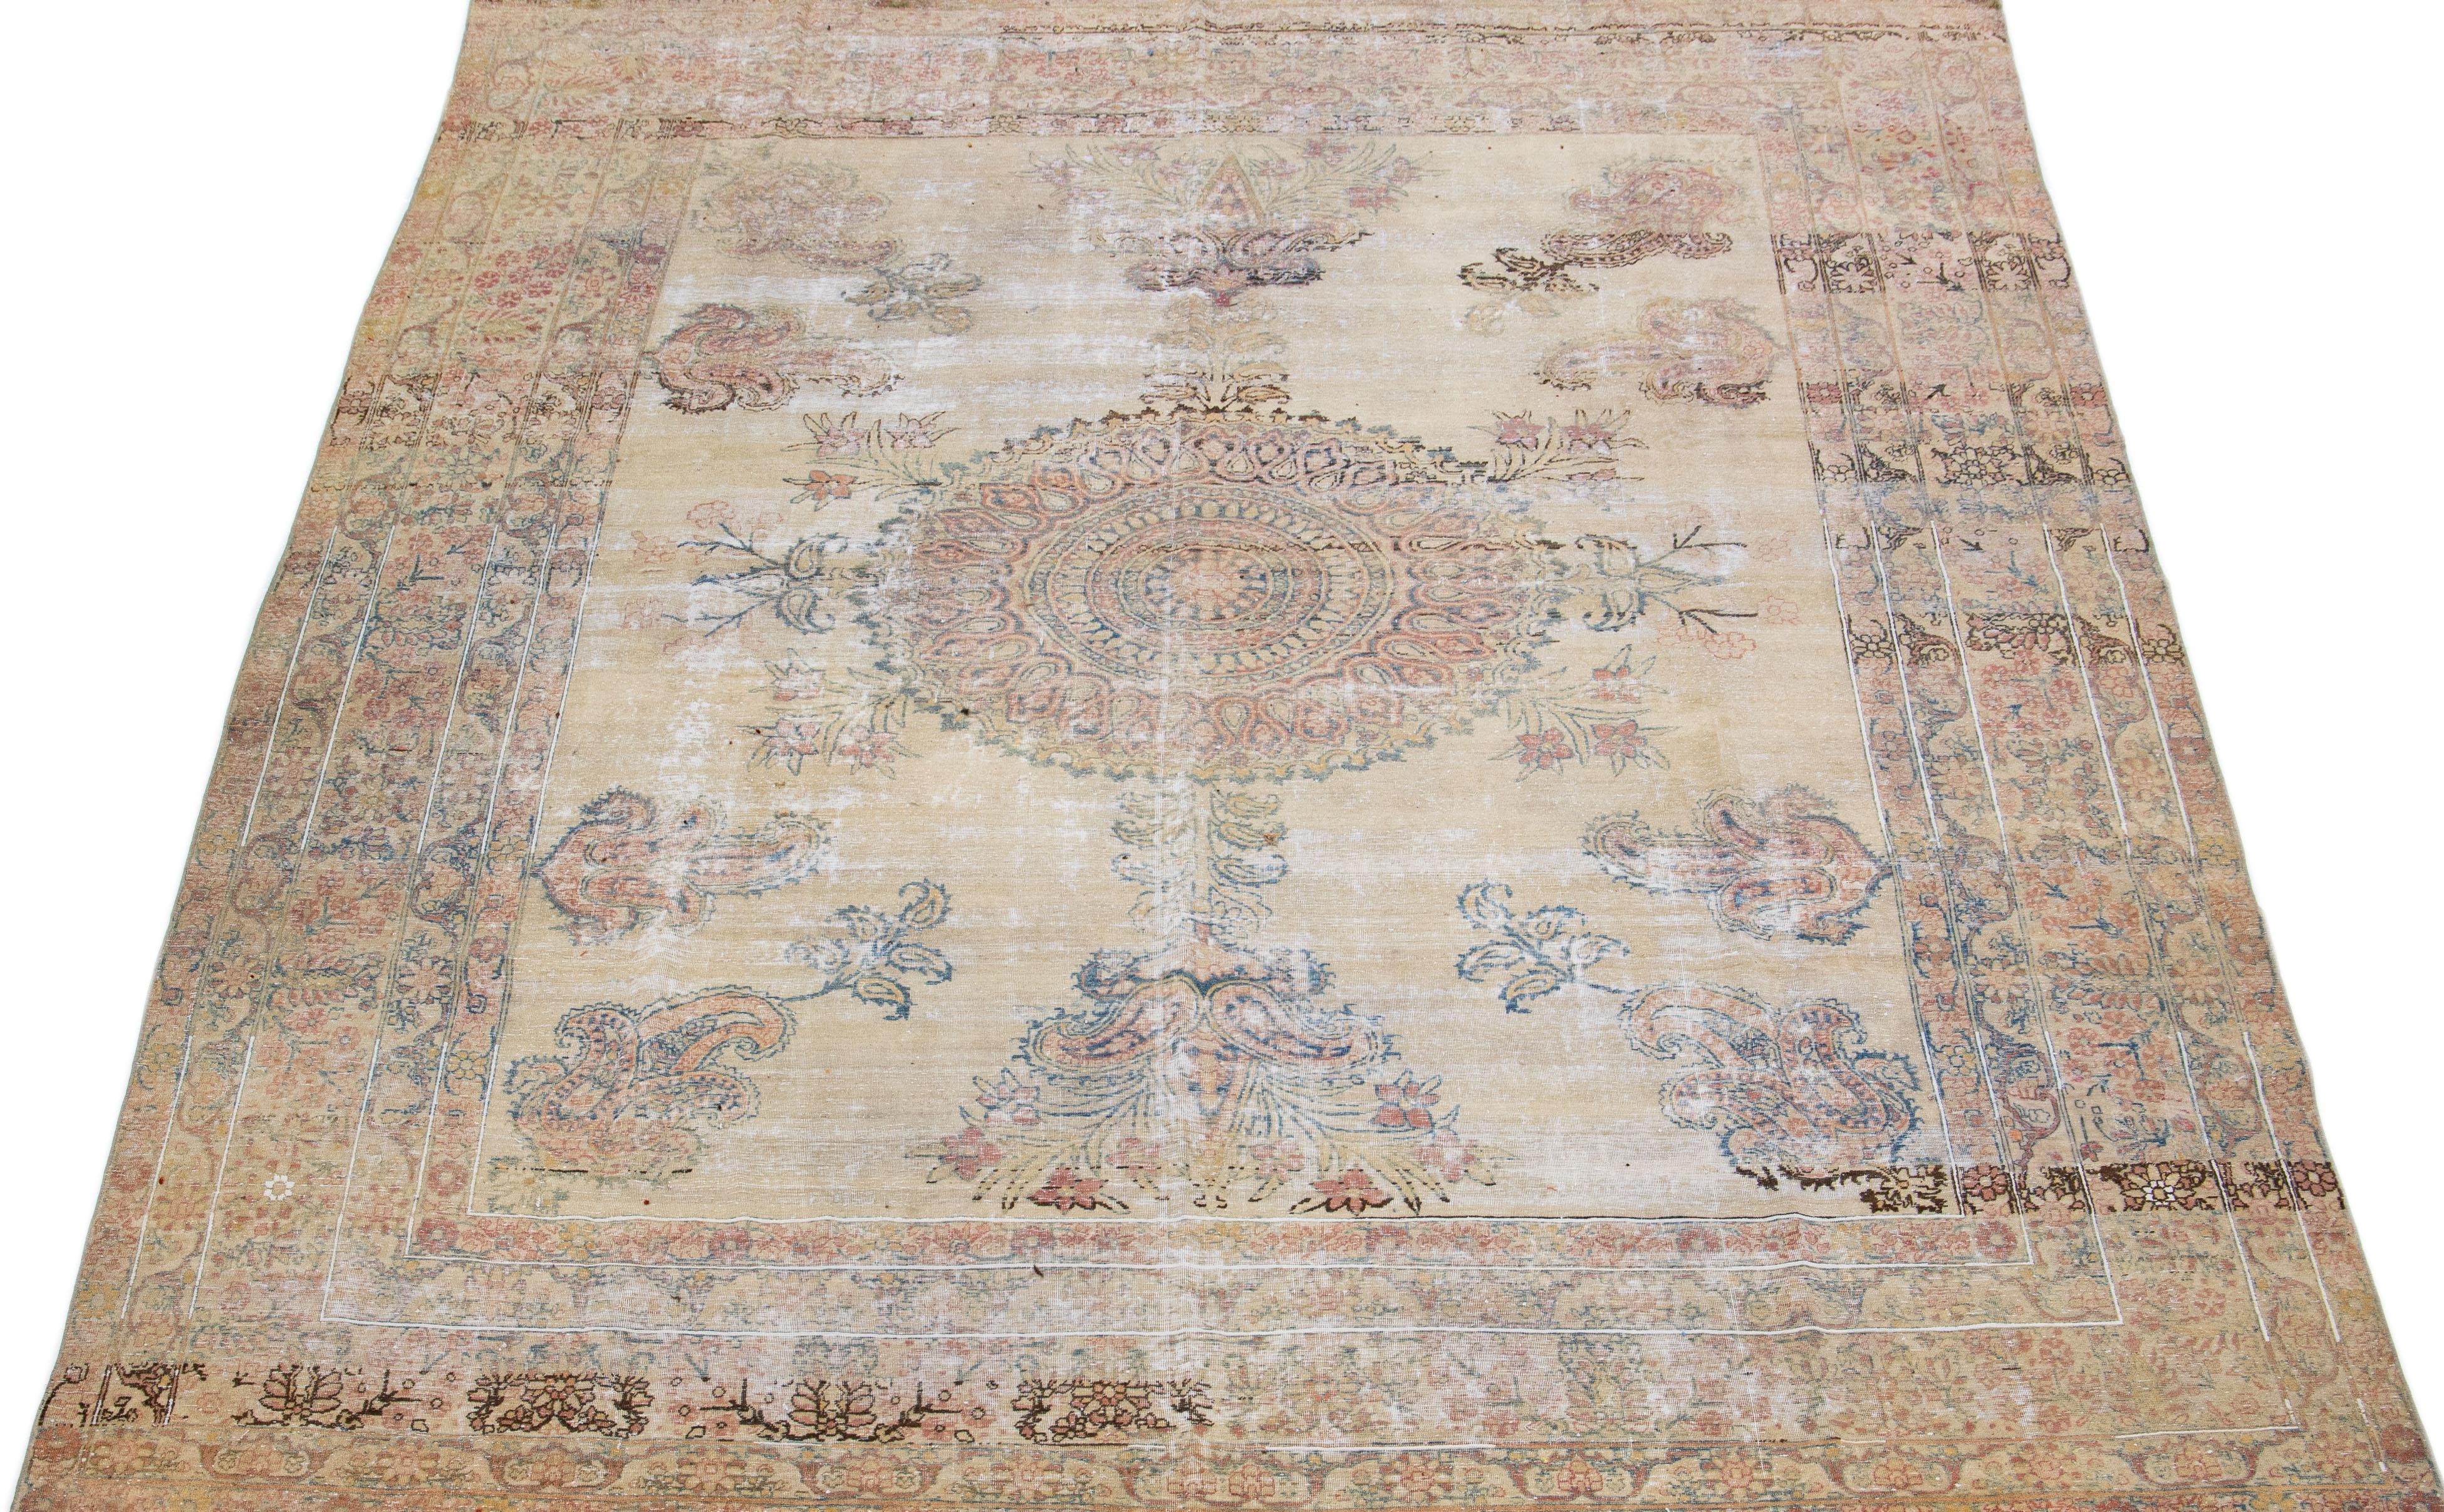 Beautiful antique Kerman hand-knotted wool rug with a tan field. This Persian rug has rust & blue accents in a gorgeous medallion floral pattern.

This rug measures: 8'6